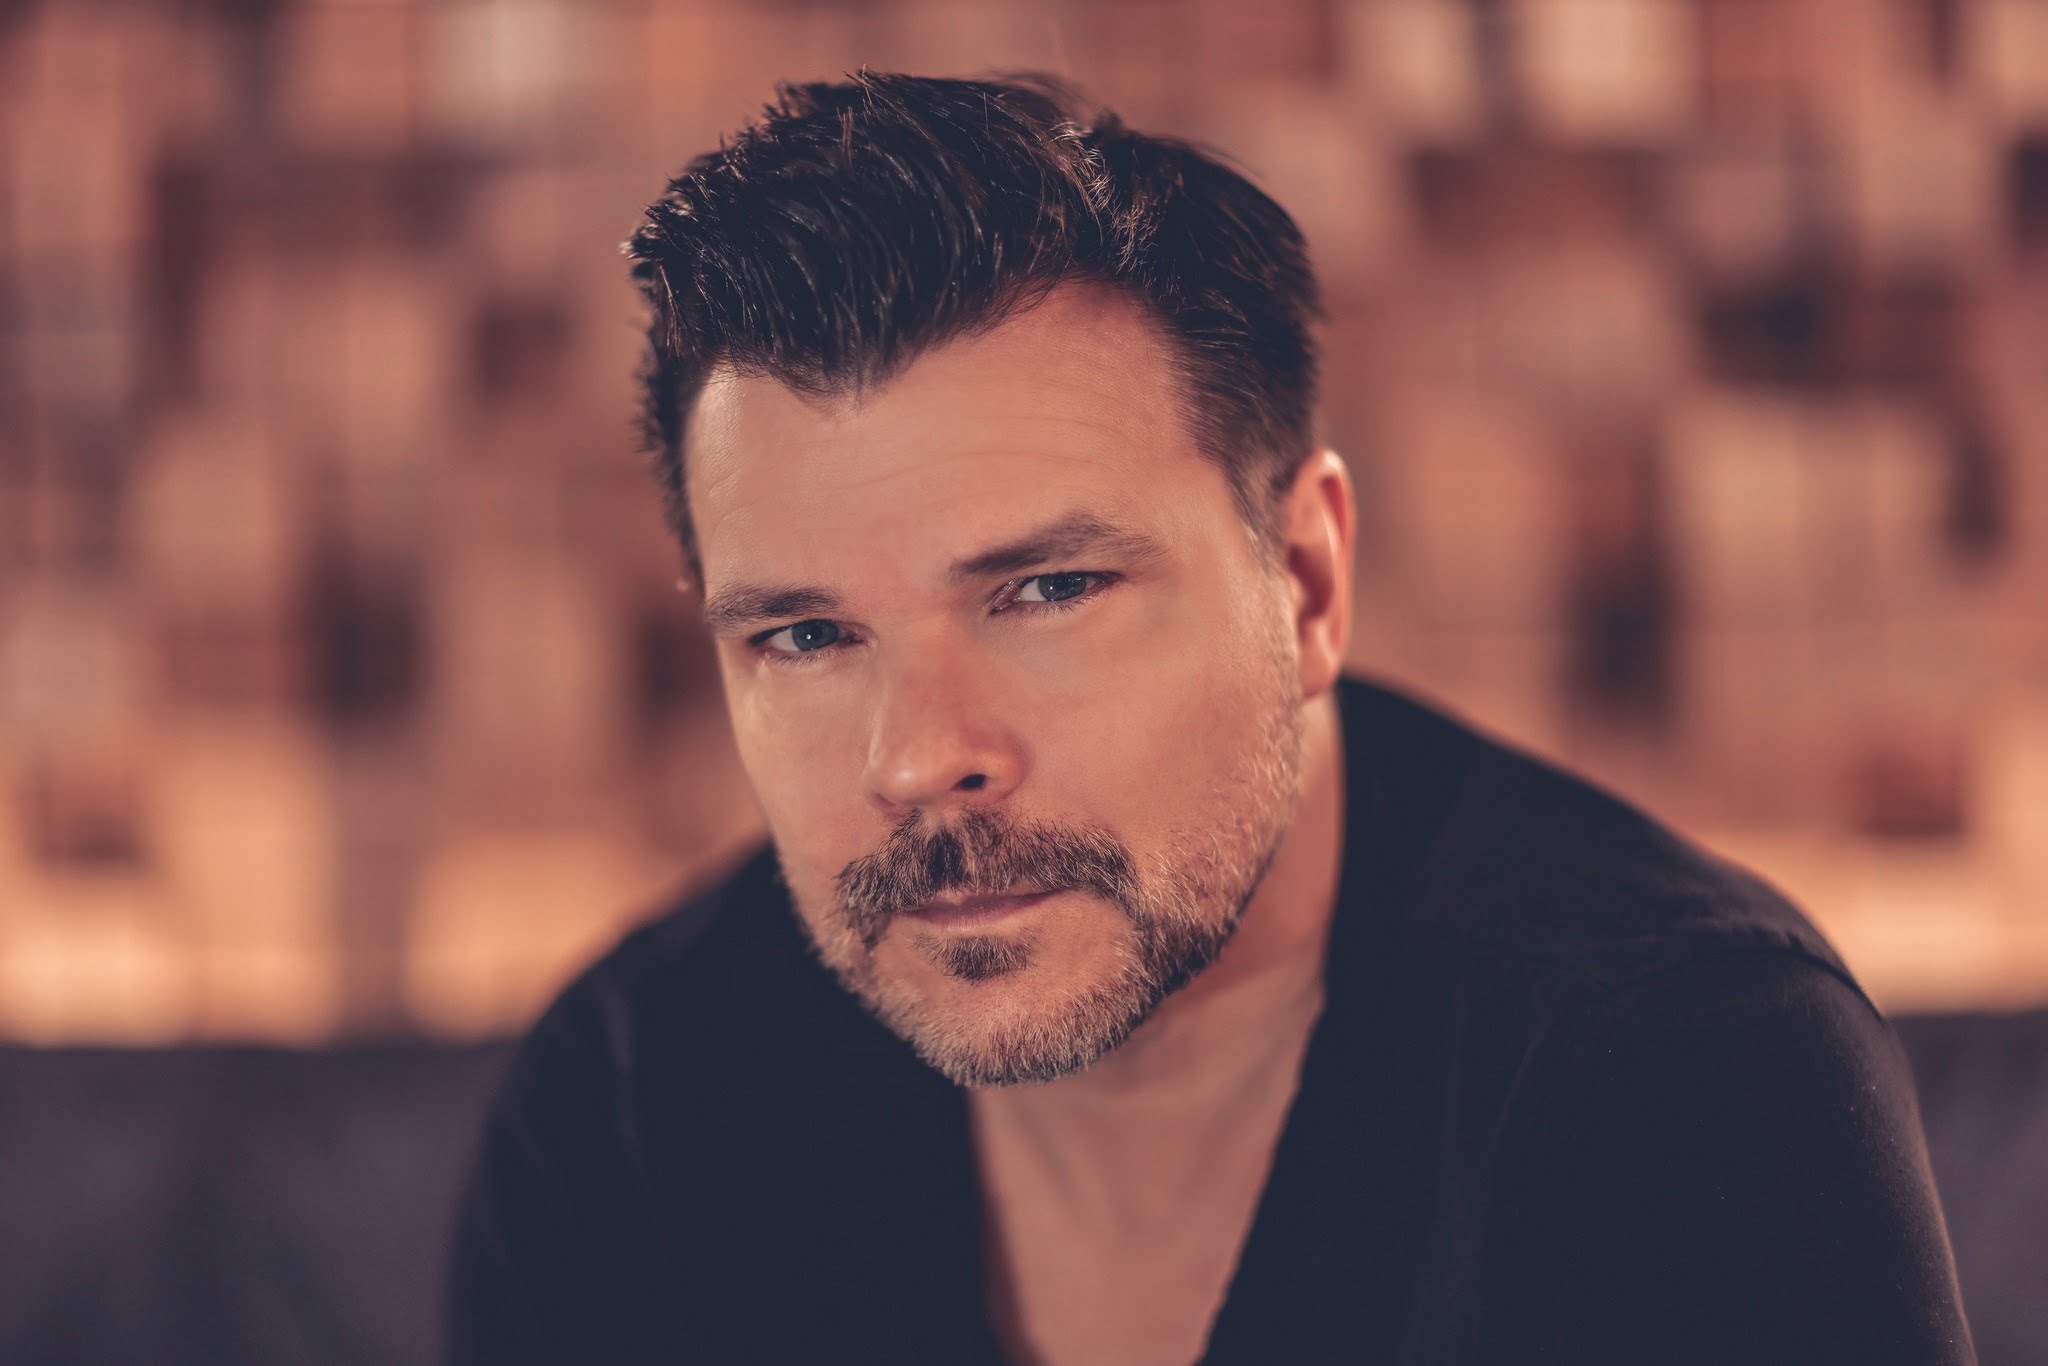 ATB joins forces with David Frank on new single ‘Take A Moment’